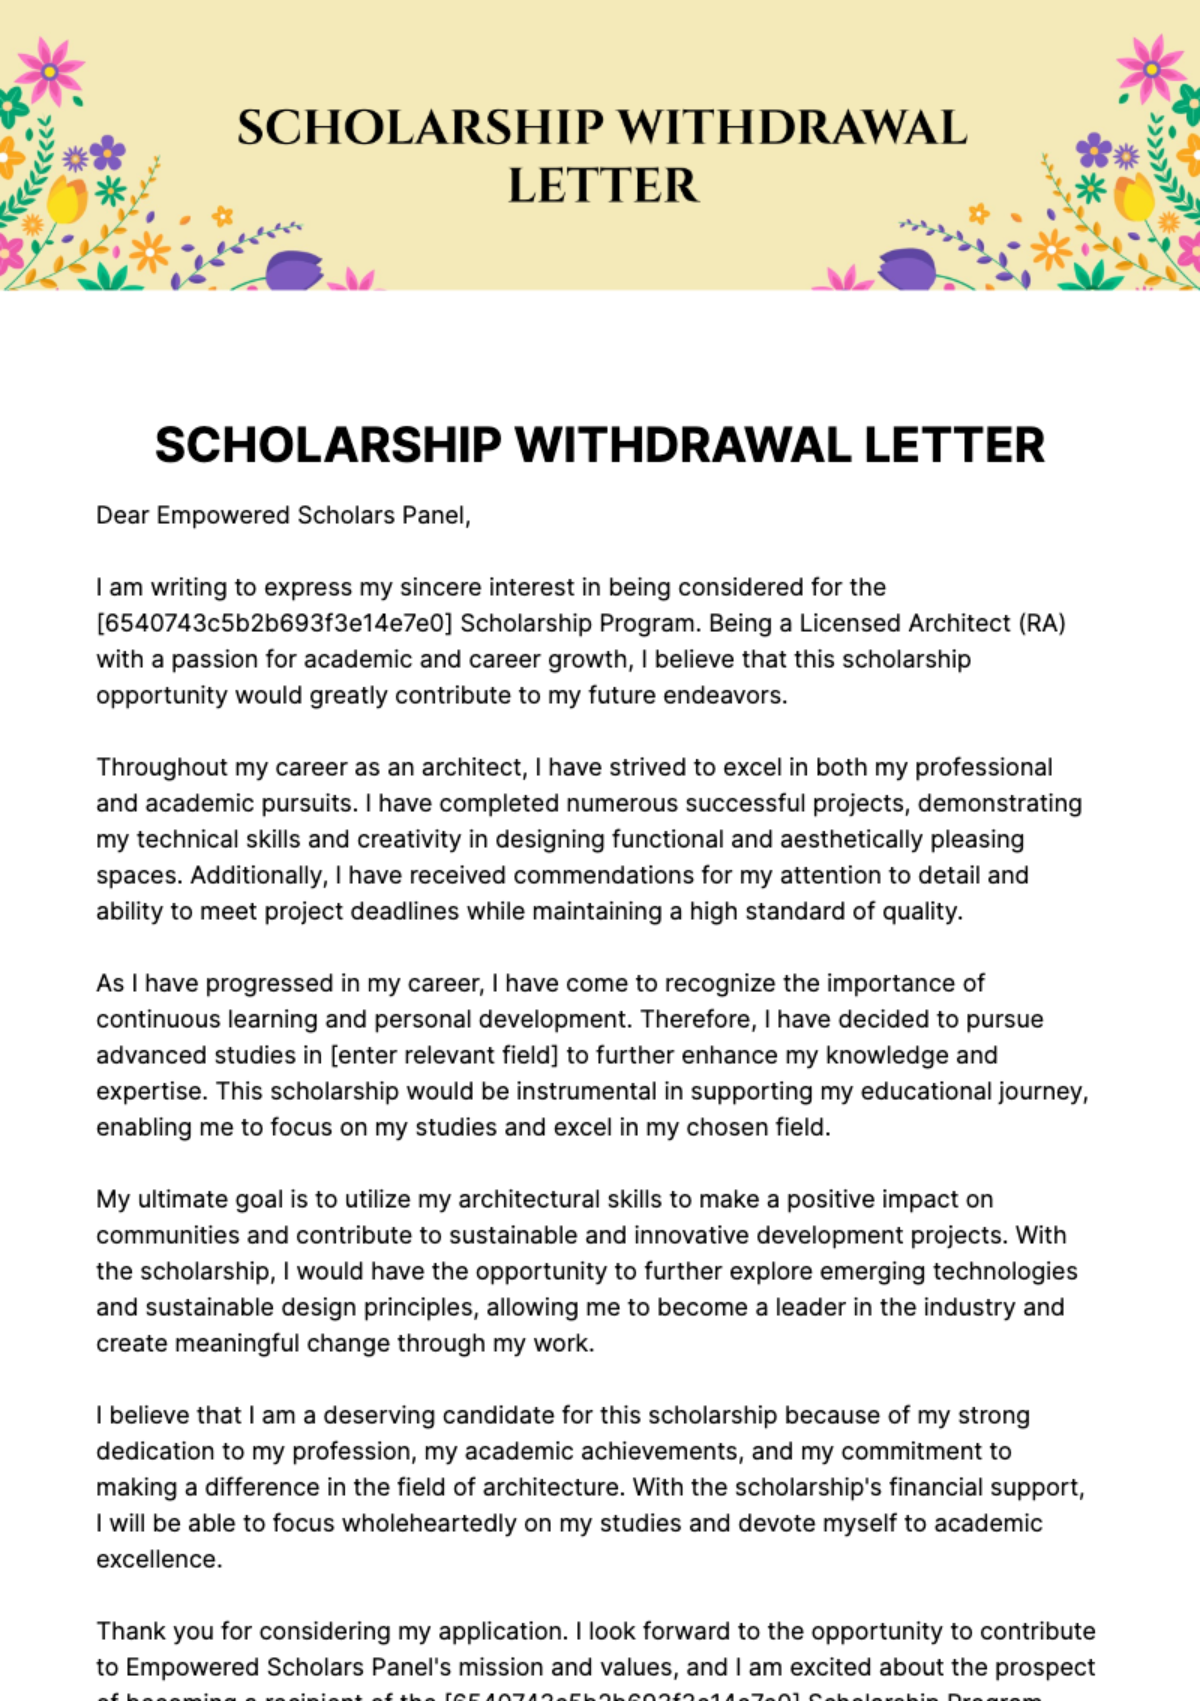 Free Scholarship Withdrawal Letter Template